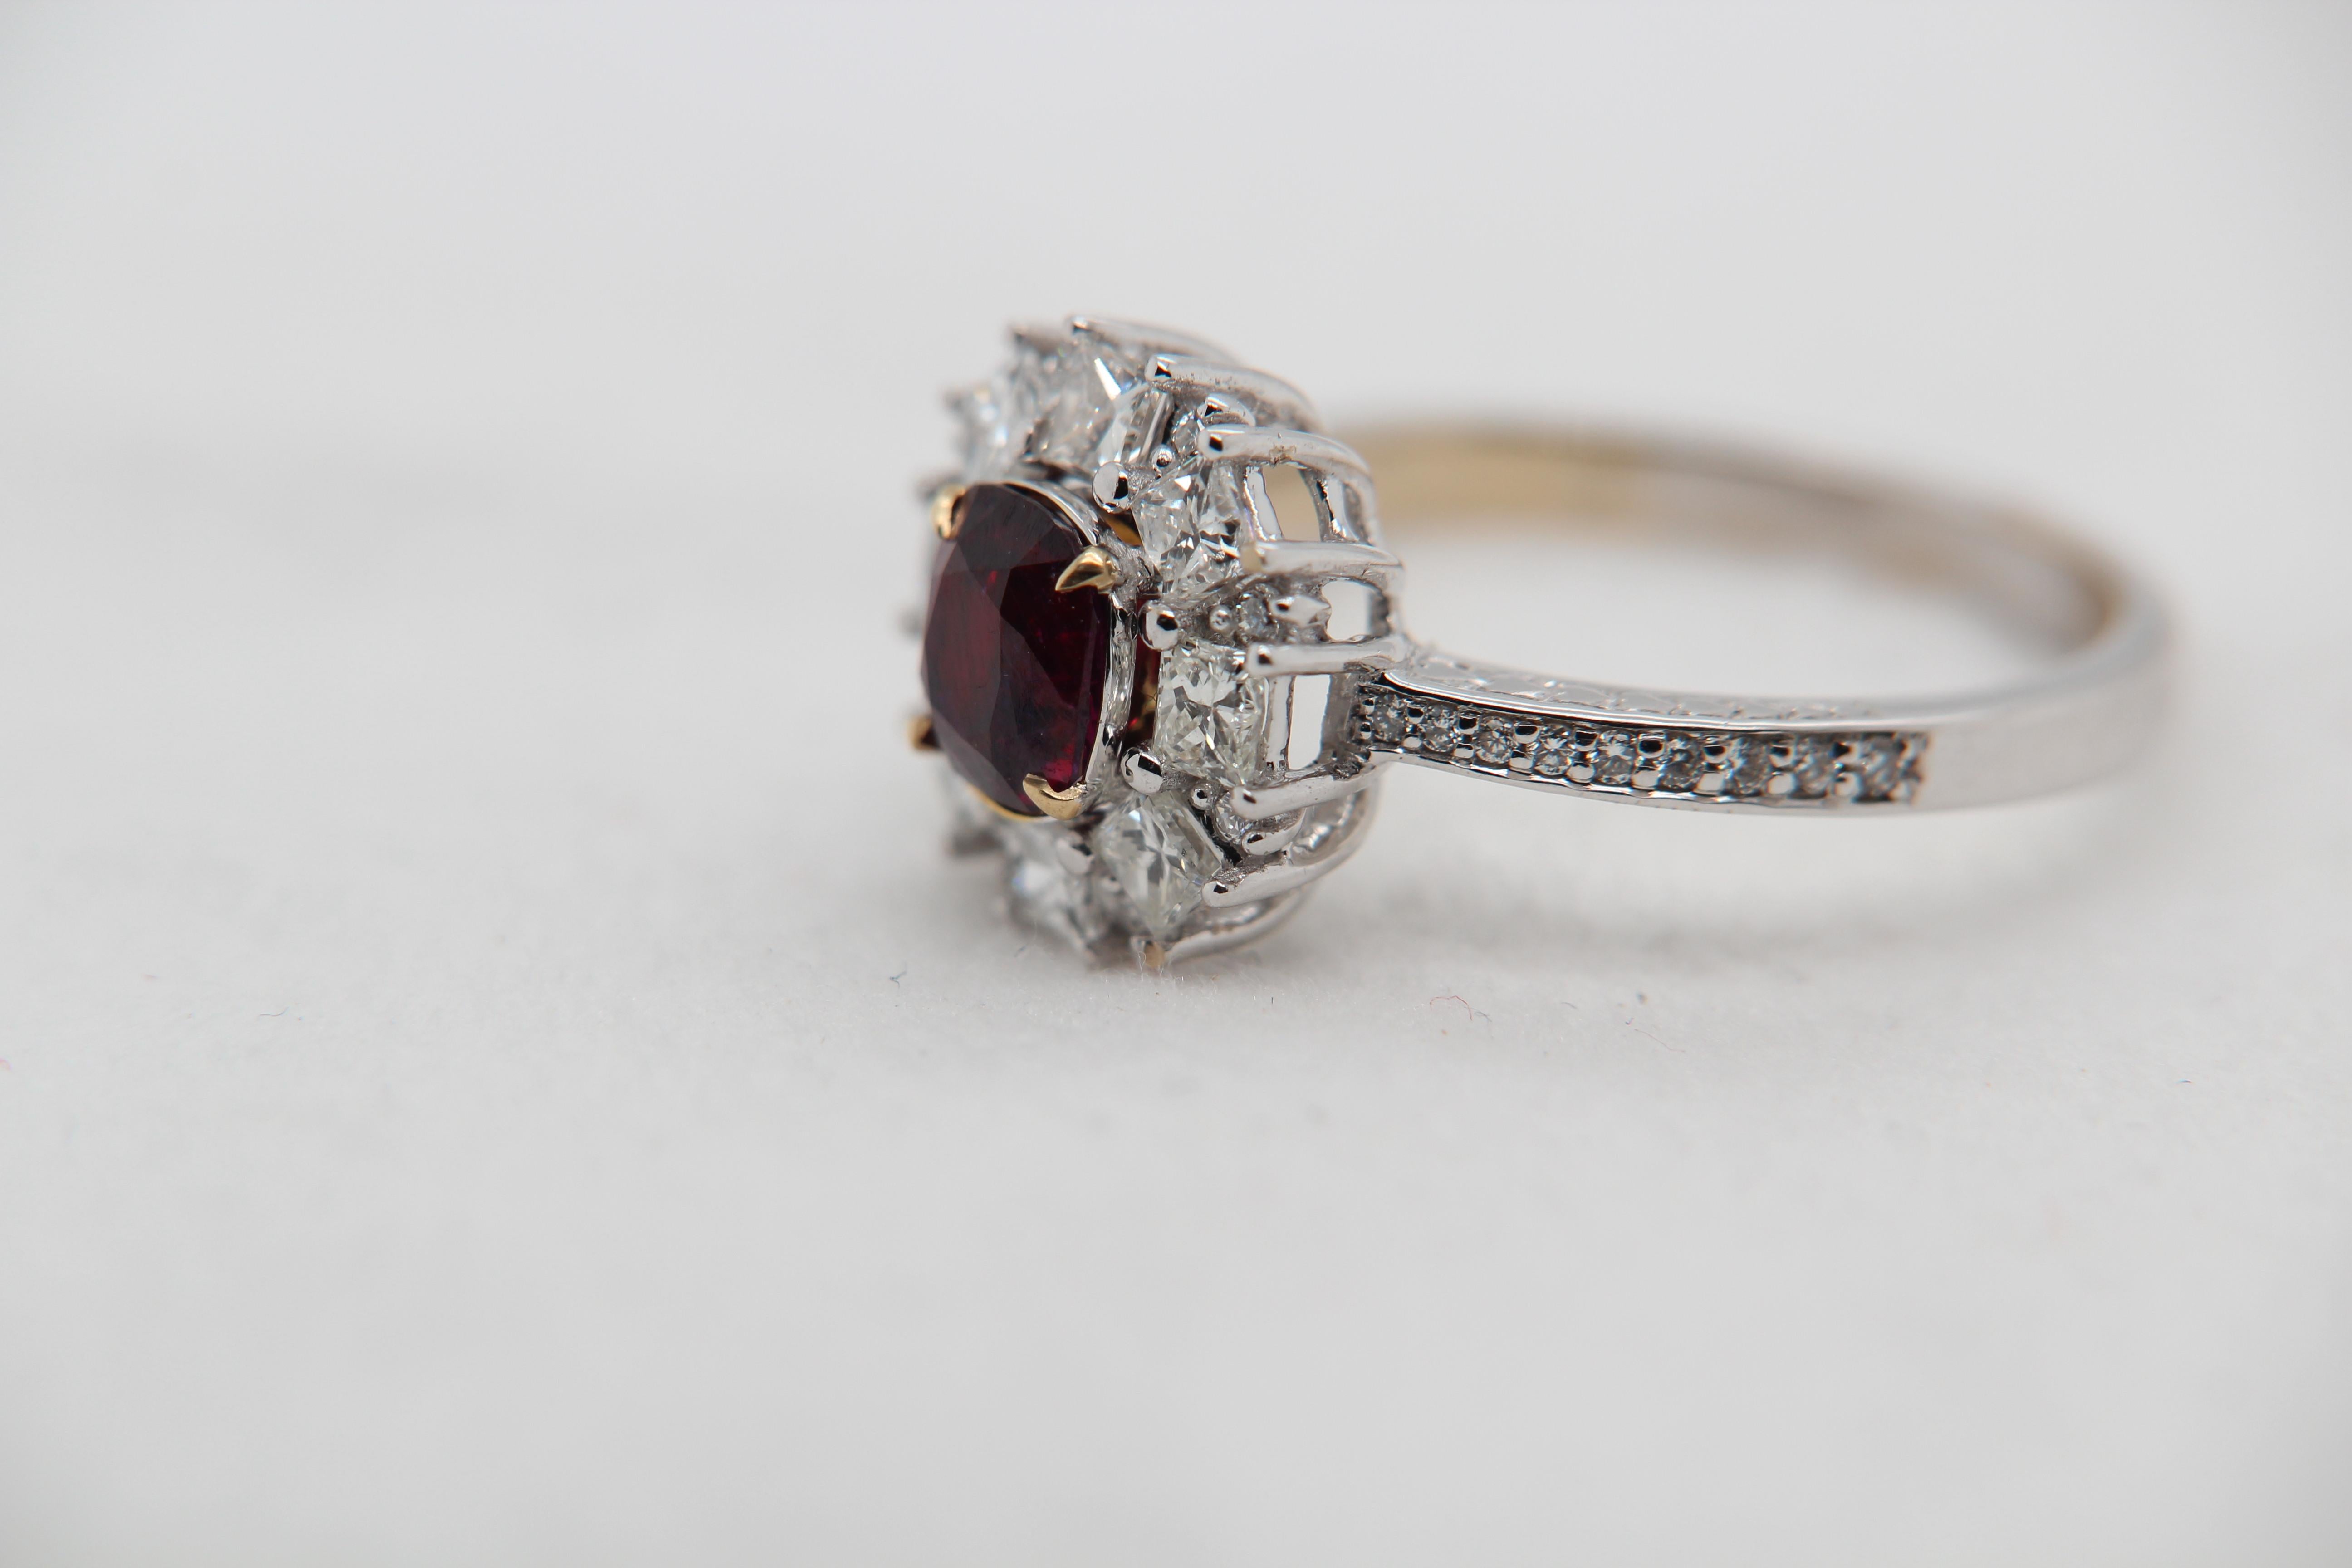 A brand new 1.29 carat Burmese ruby ring mounted with diamonds in 18 Karat gold. The ruby weighs 1.29 carat and is certified by Gem Research Swisslab (GRS) as natural, no heat, and 'Vivid Red Pigeon's Blood'. The total diamond weight is 0.93 carat